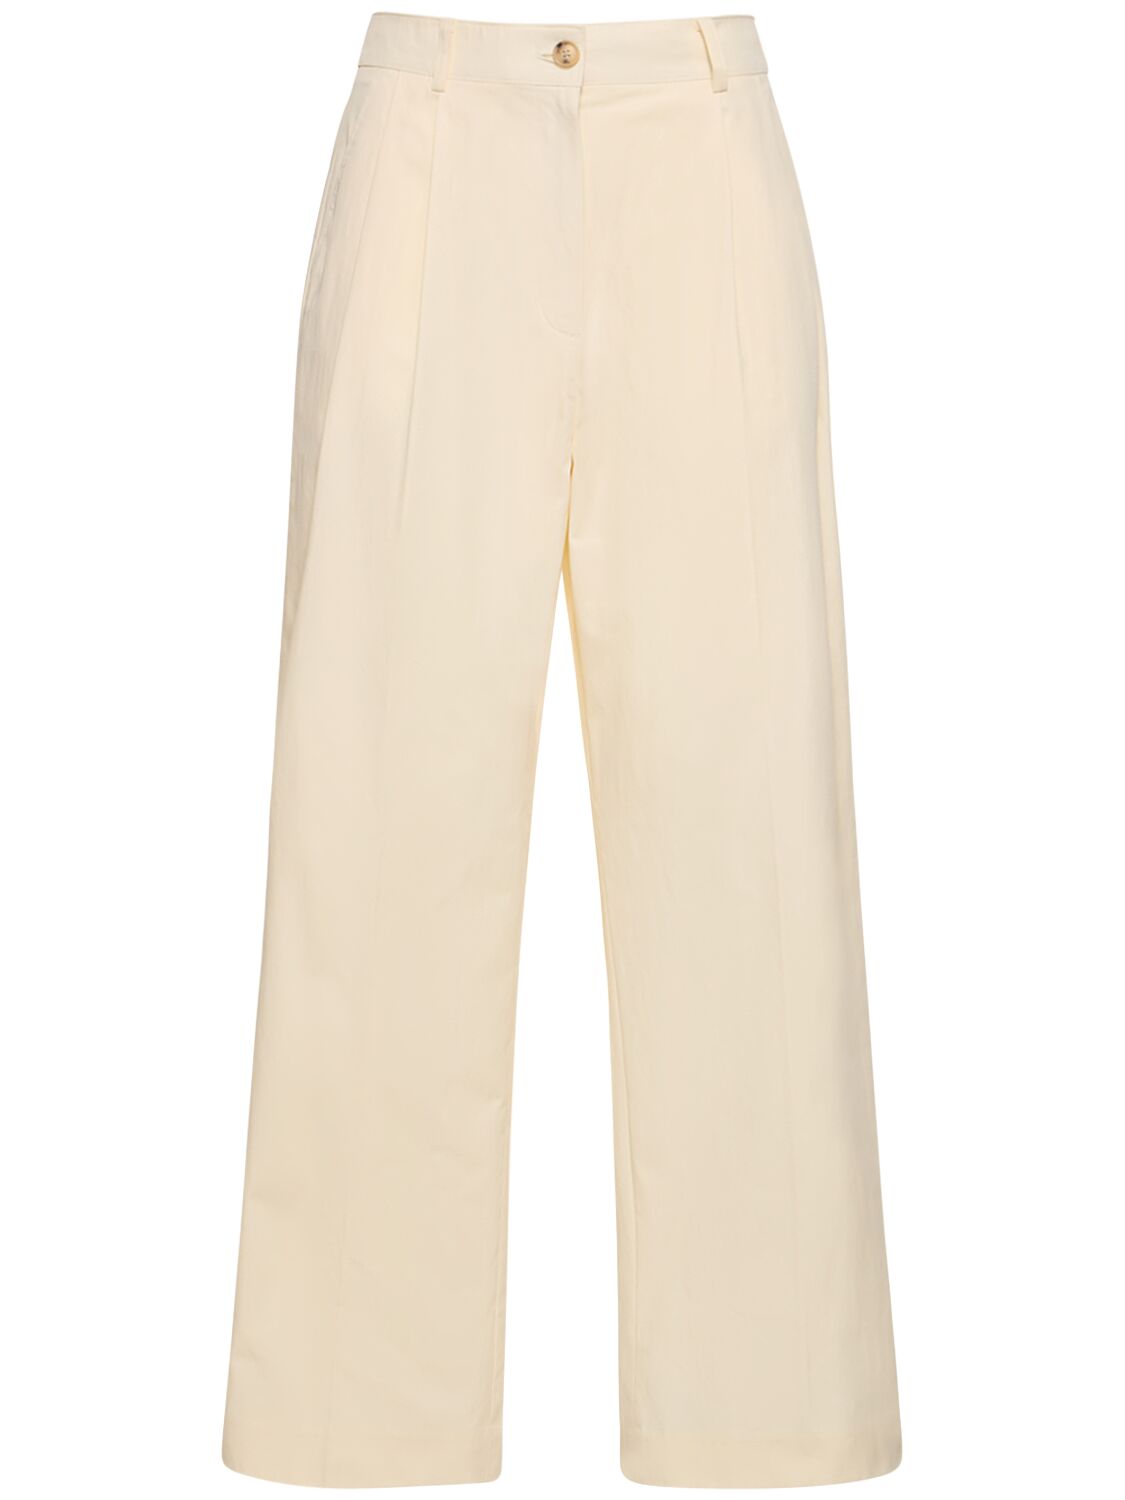 Dunst Pleated Cotton & Nylon Chino Pants In White